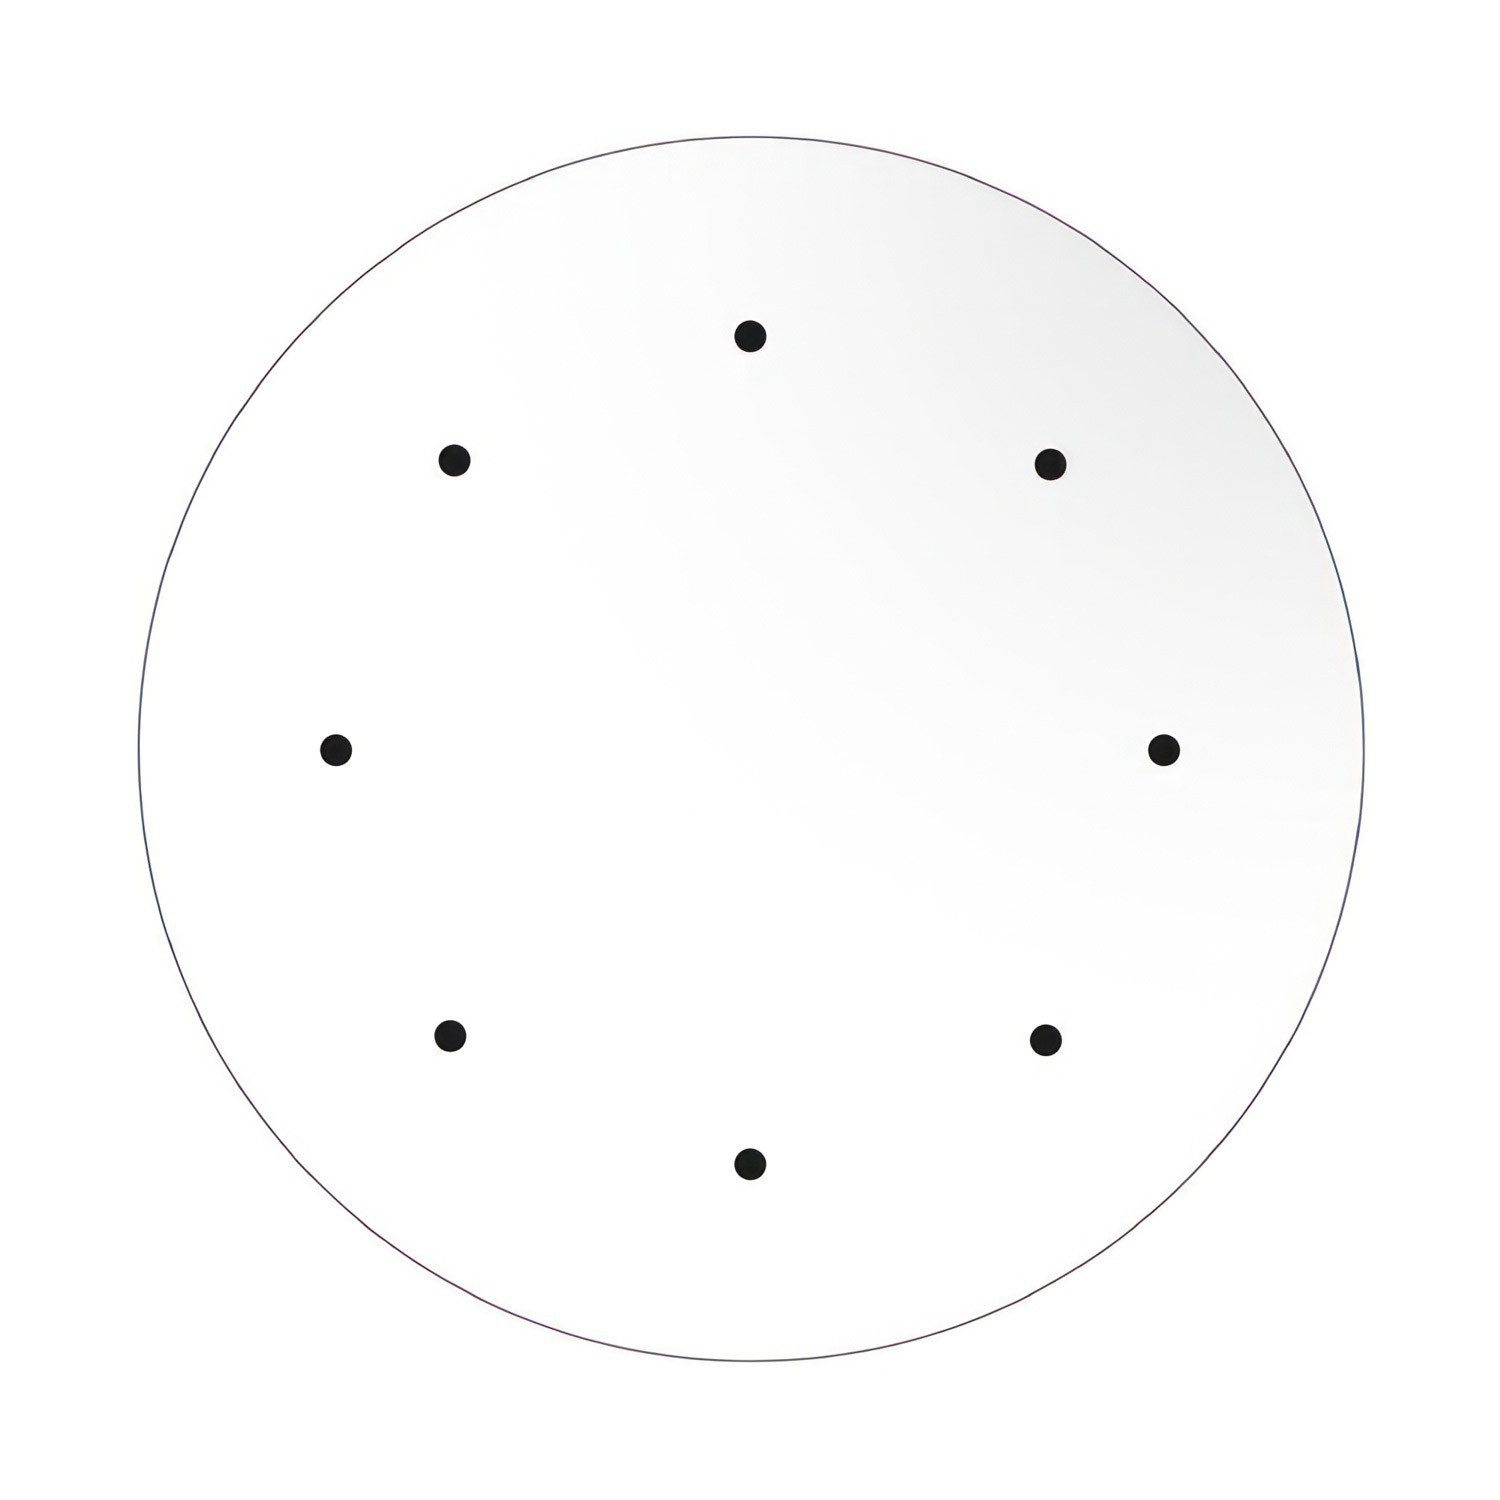 Large Round Smart ceiling rose, 400 mm Panel Rose-One with 8 holes - compatible with voice assistants